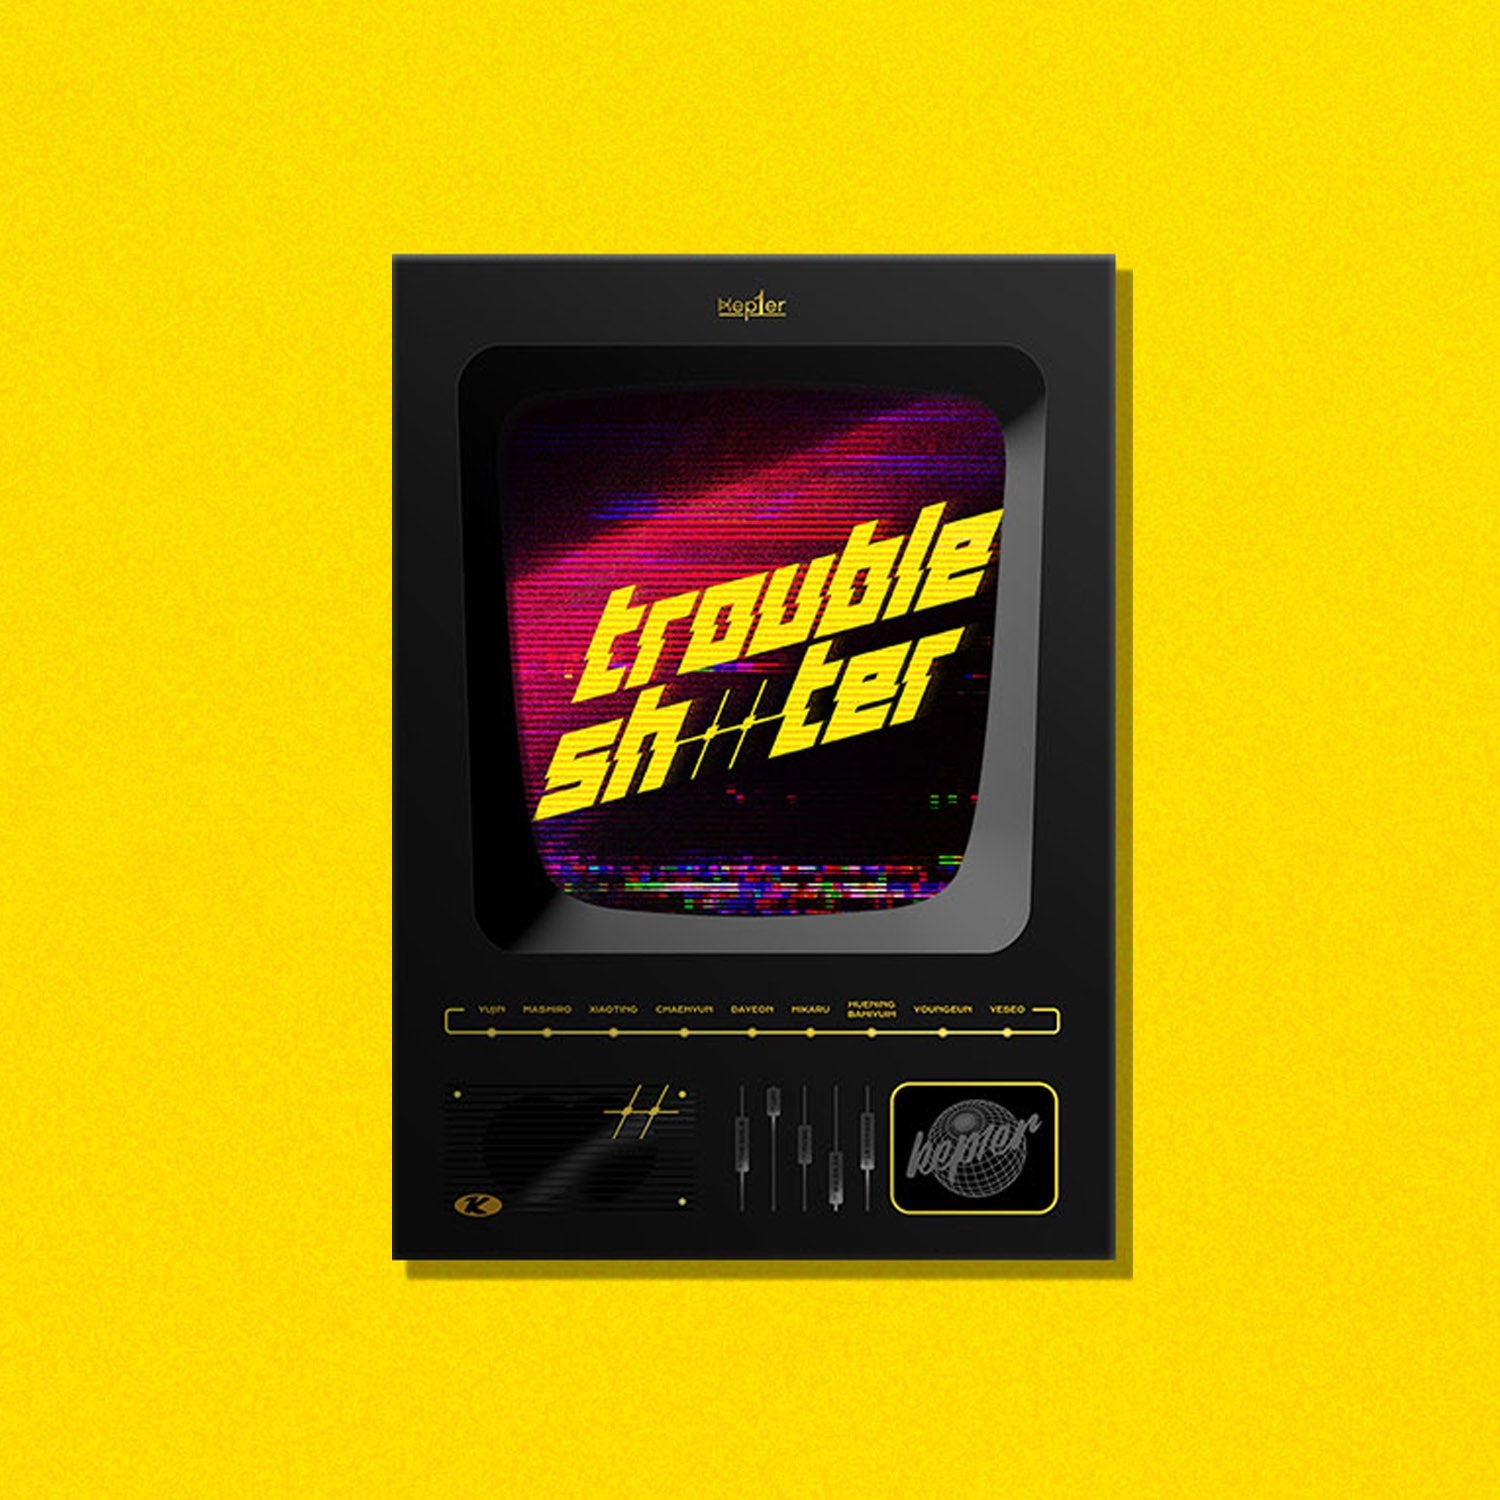 KEP1ER 3RD MINI ALBUM 'TROUBLESHOOTER' DAYDREAM COVER